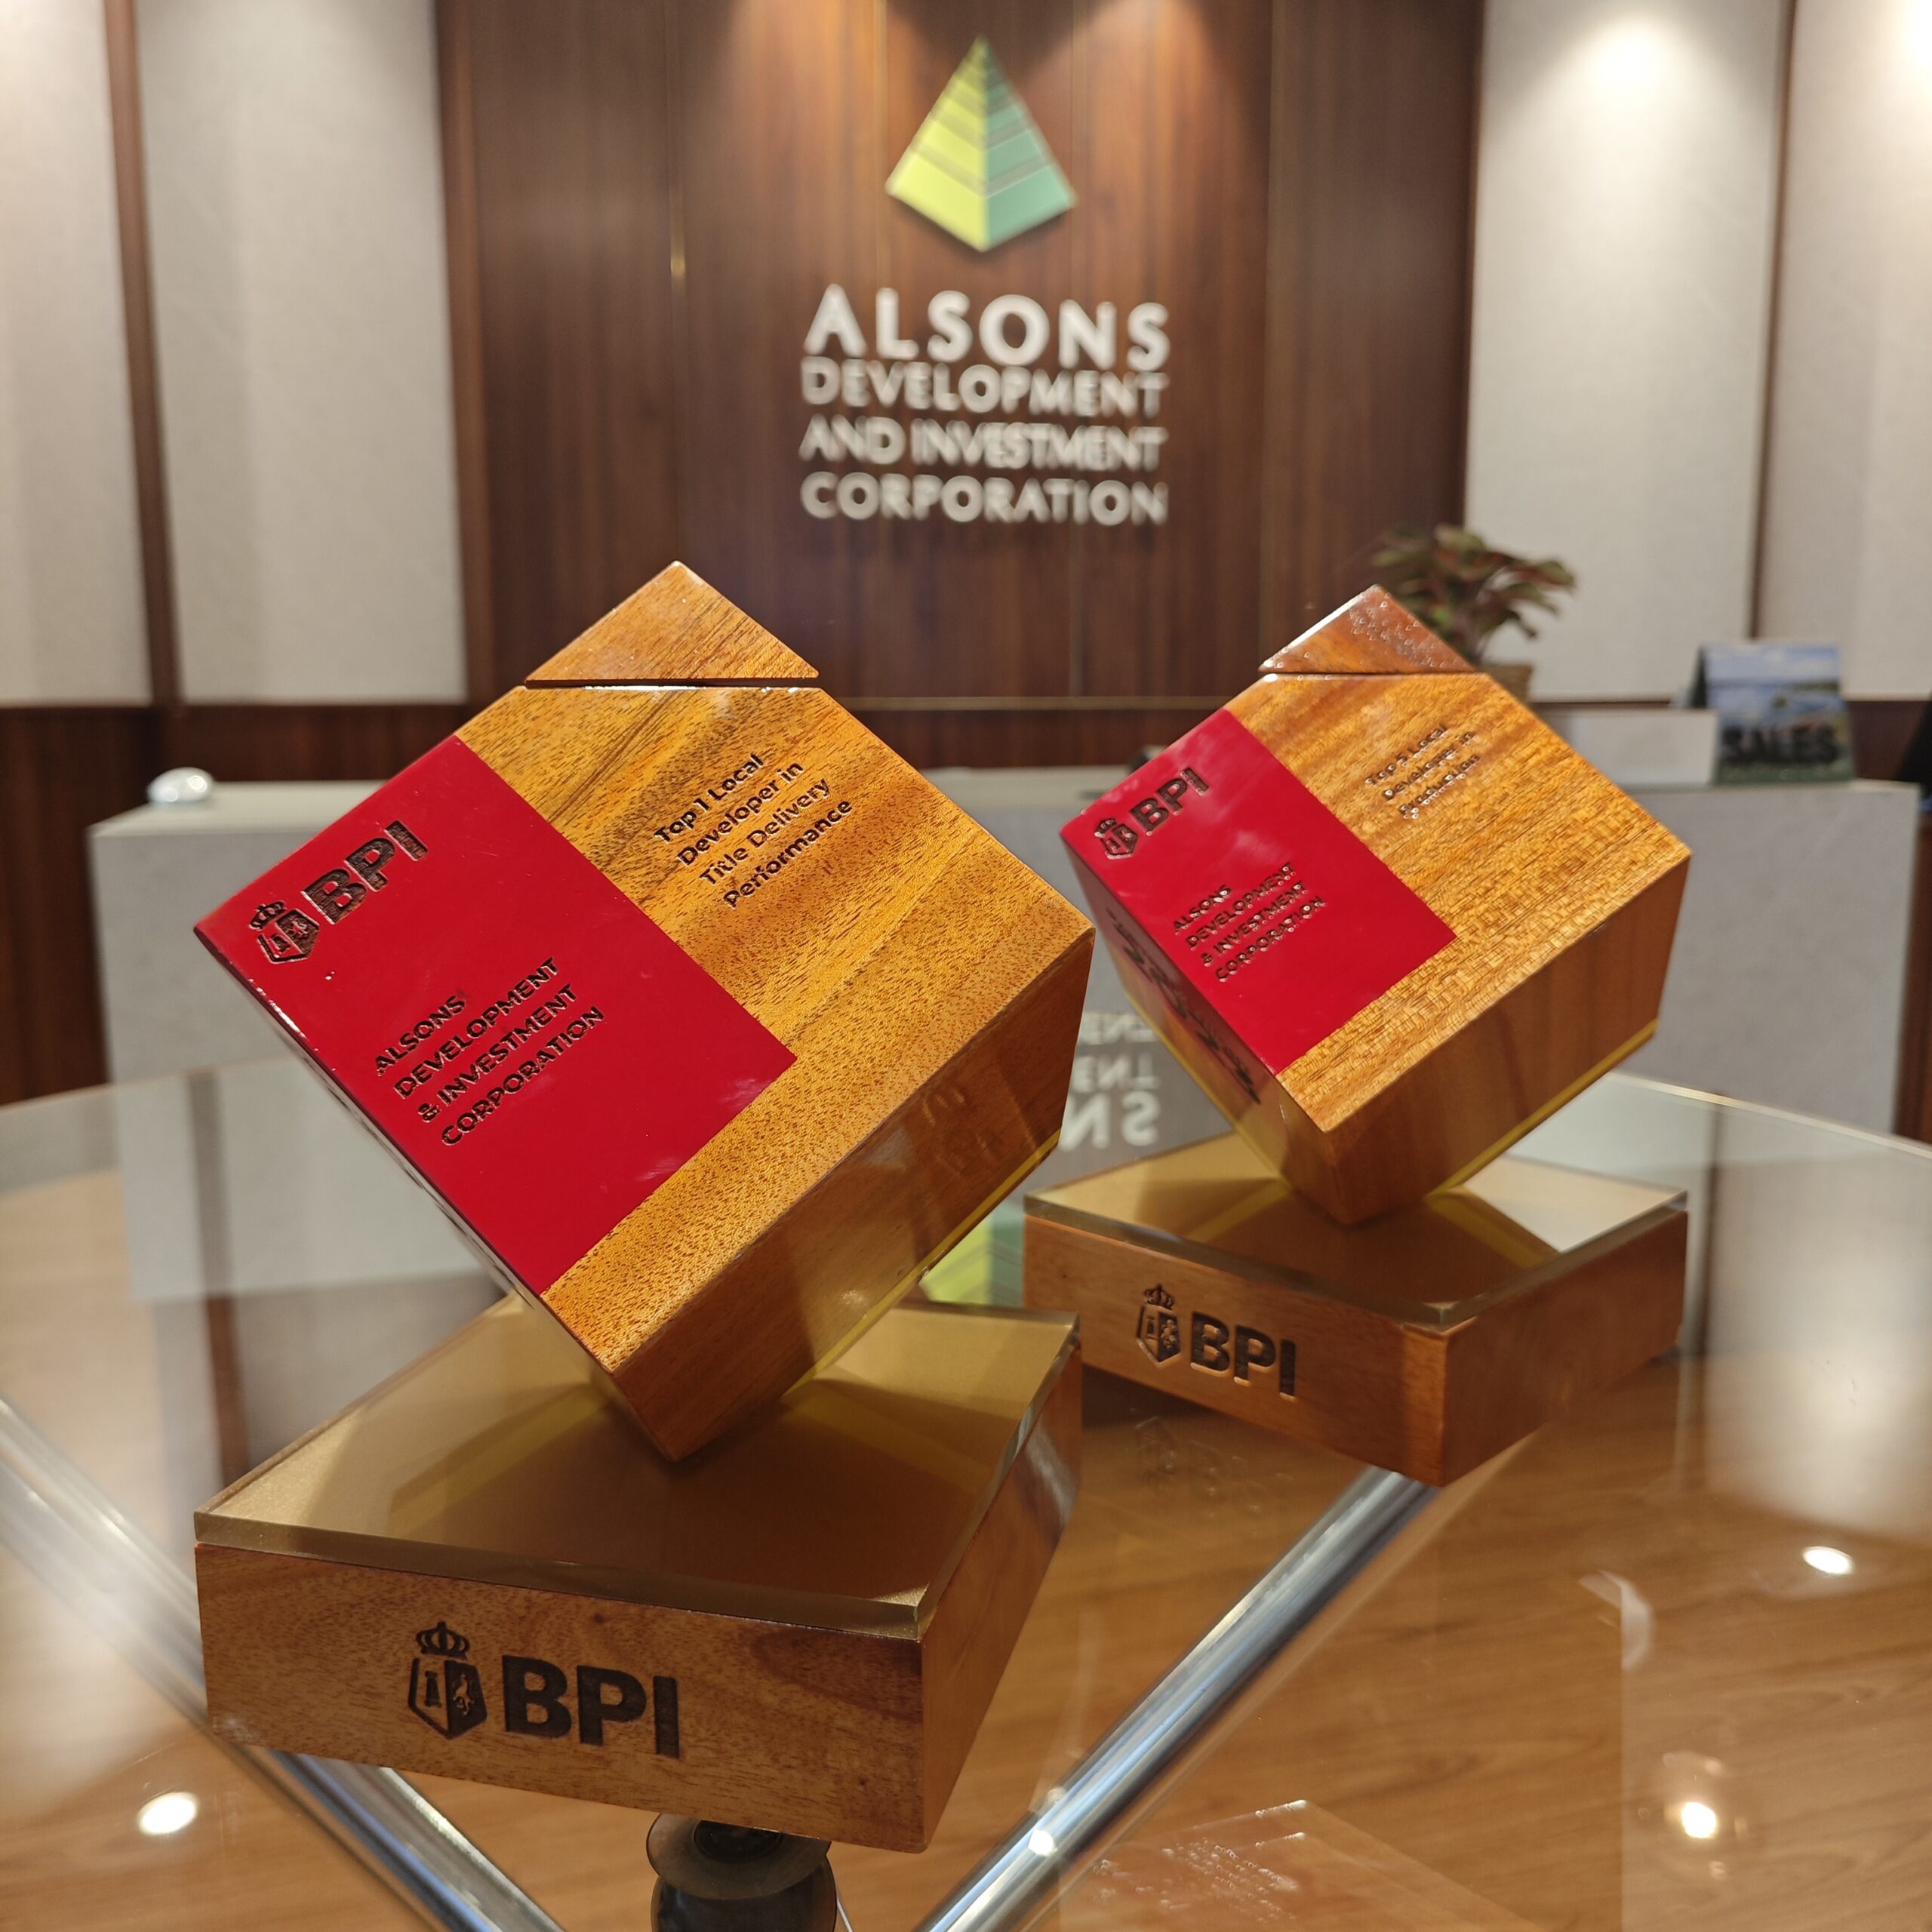 Alsons Dev earns top honors at the BPI Partners Appreciation Night